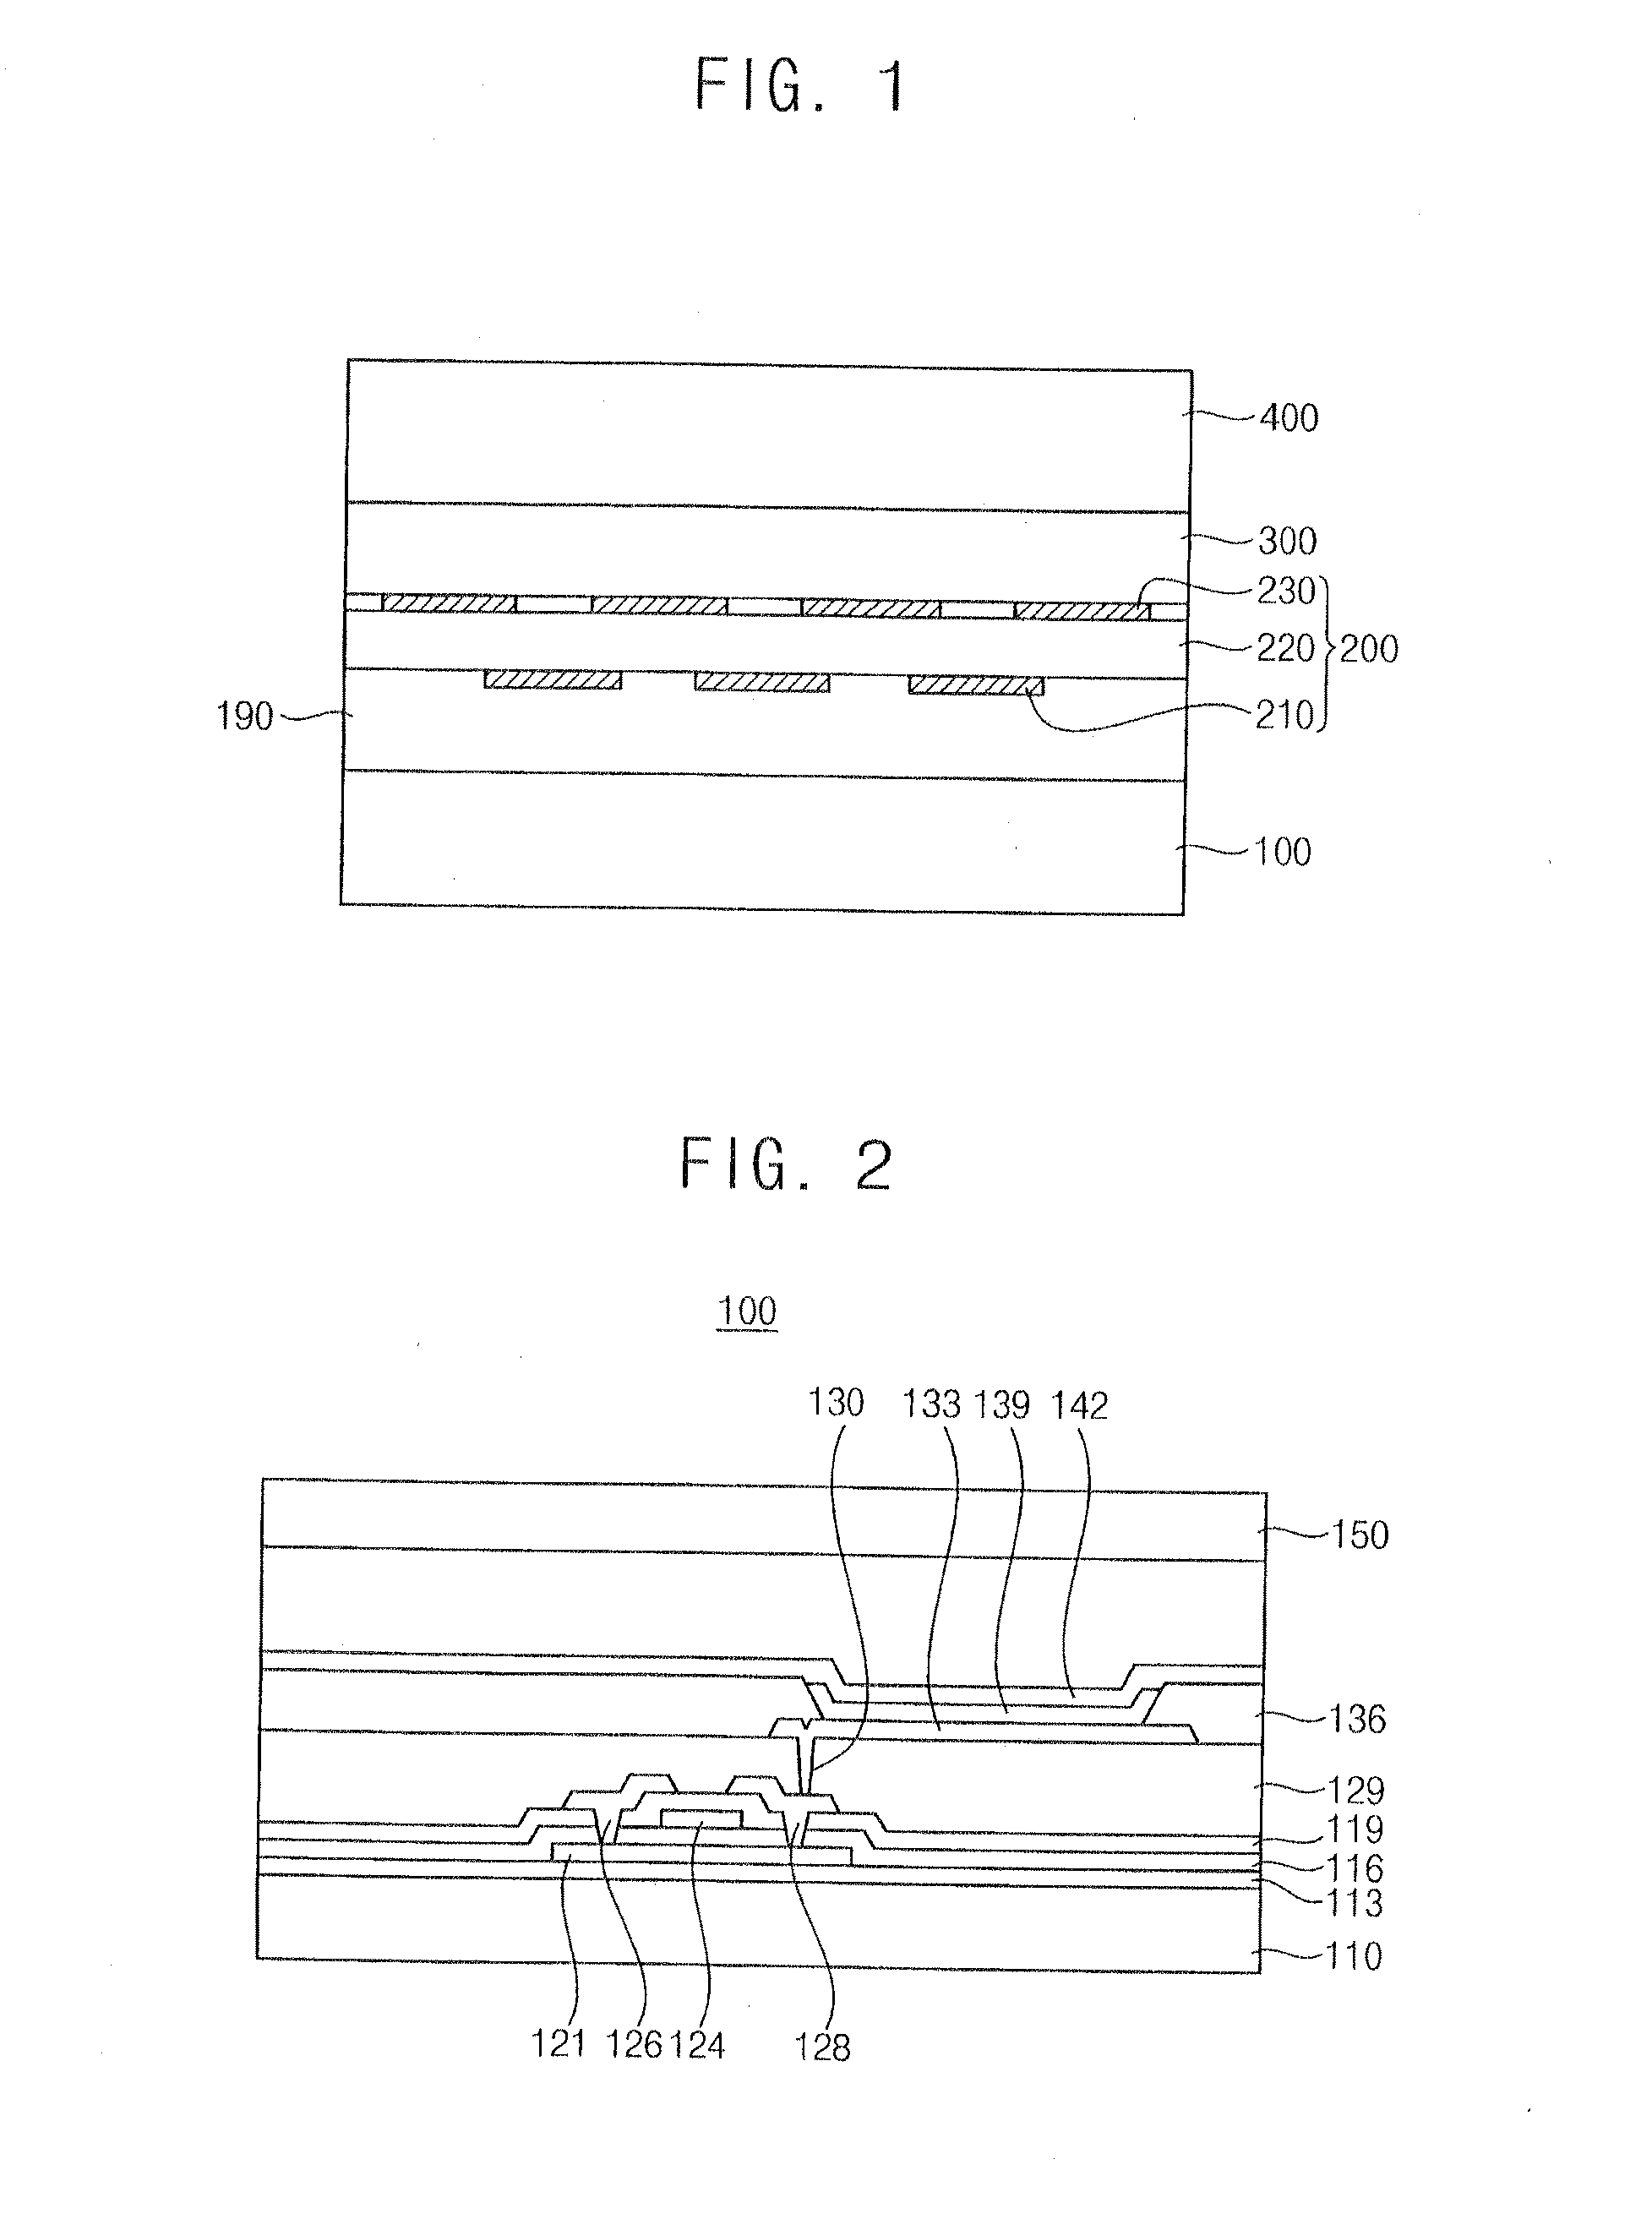 Display devices and methods of manufacturing display devices